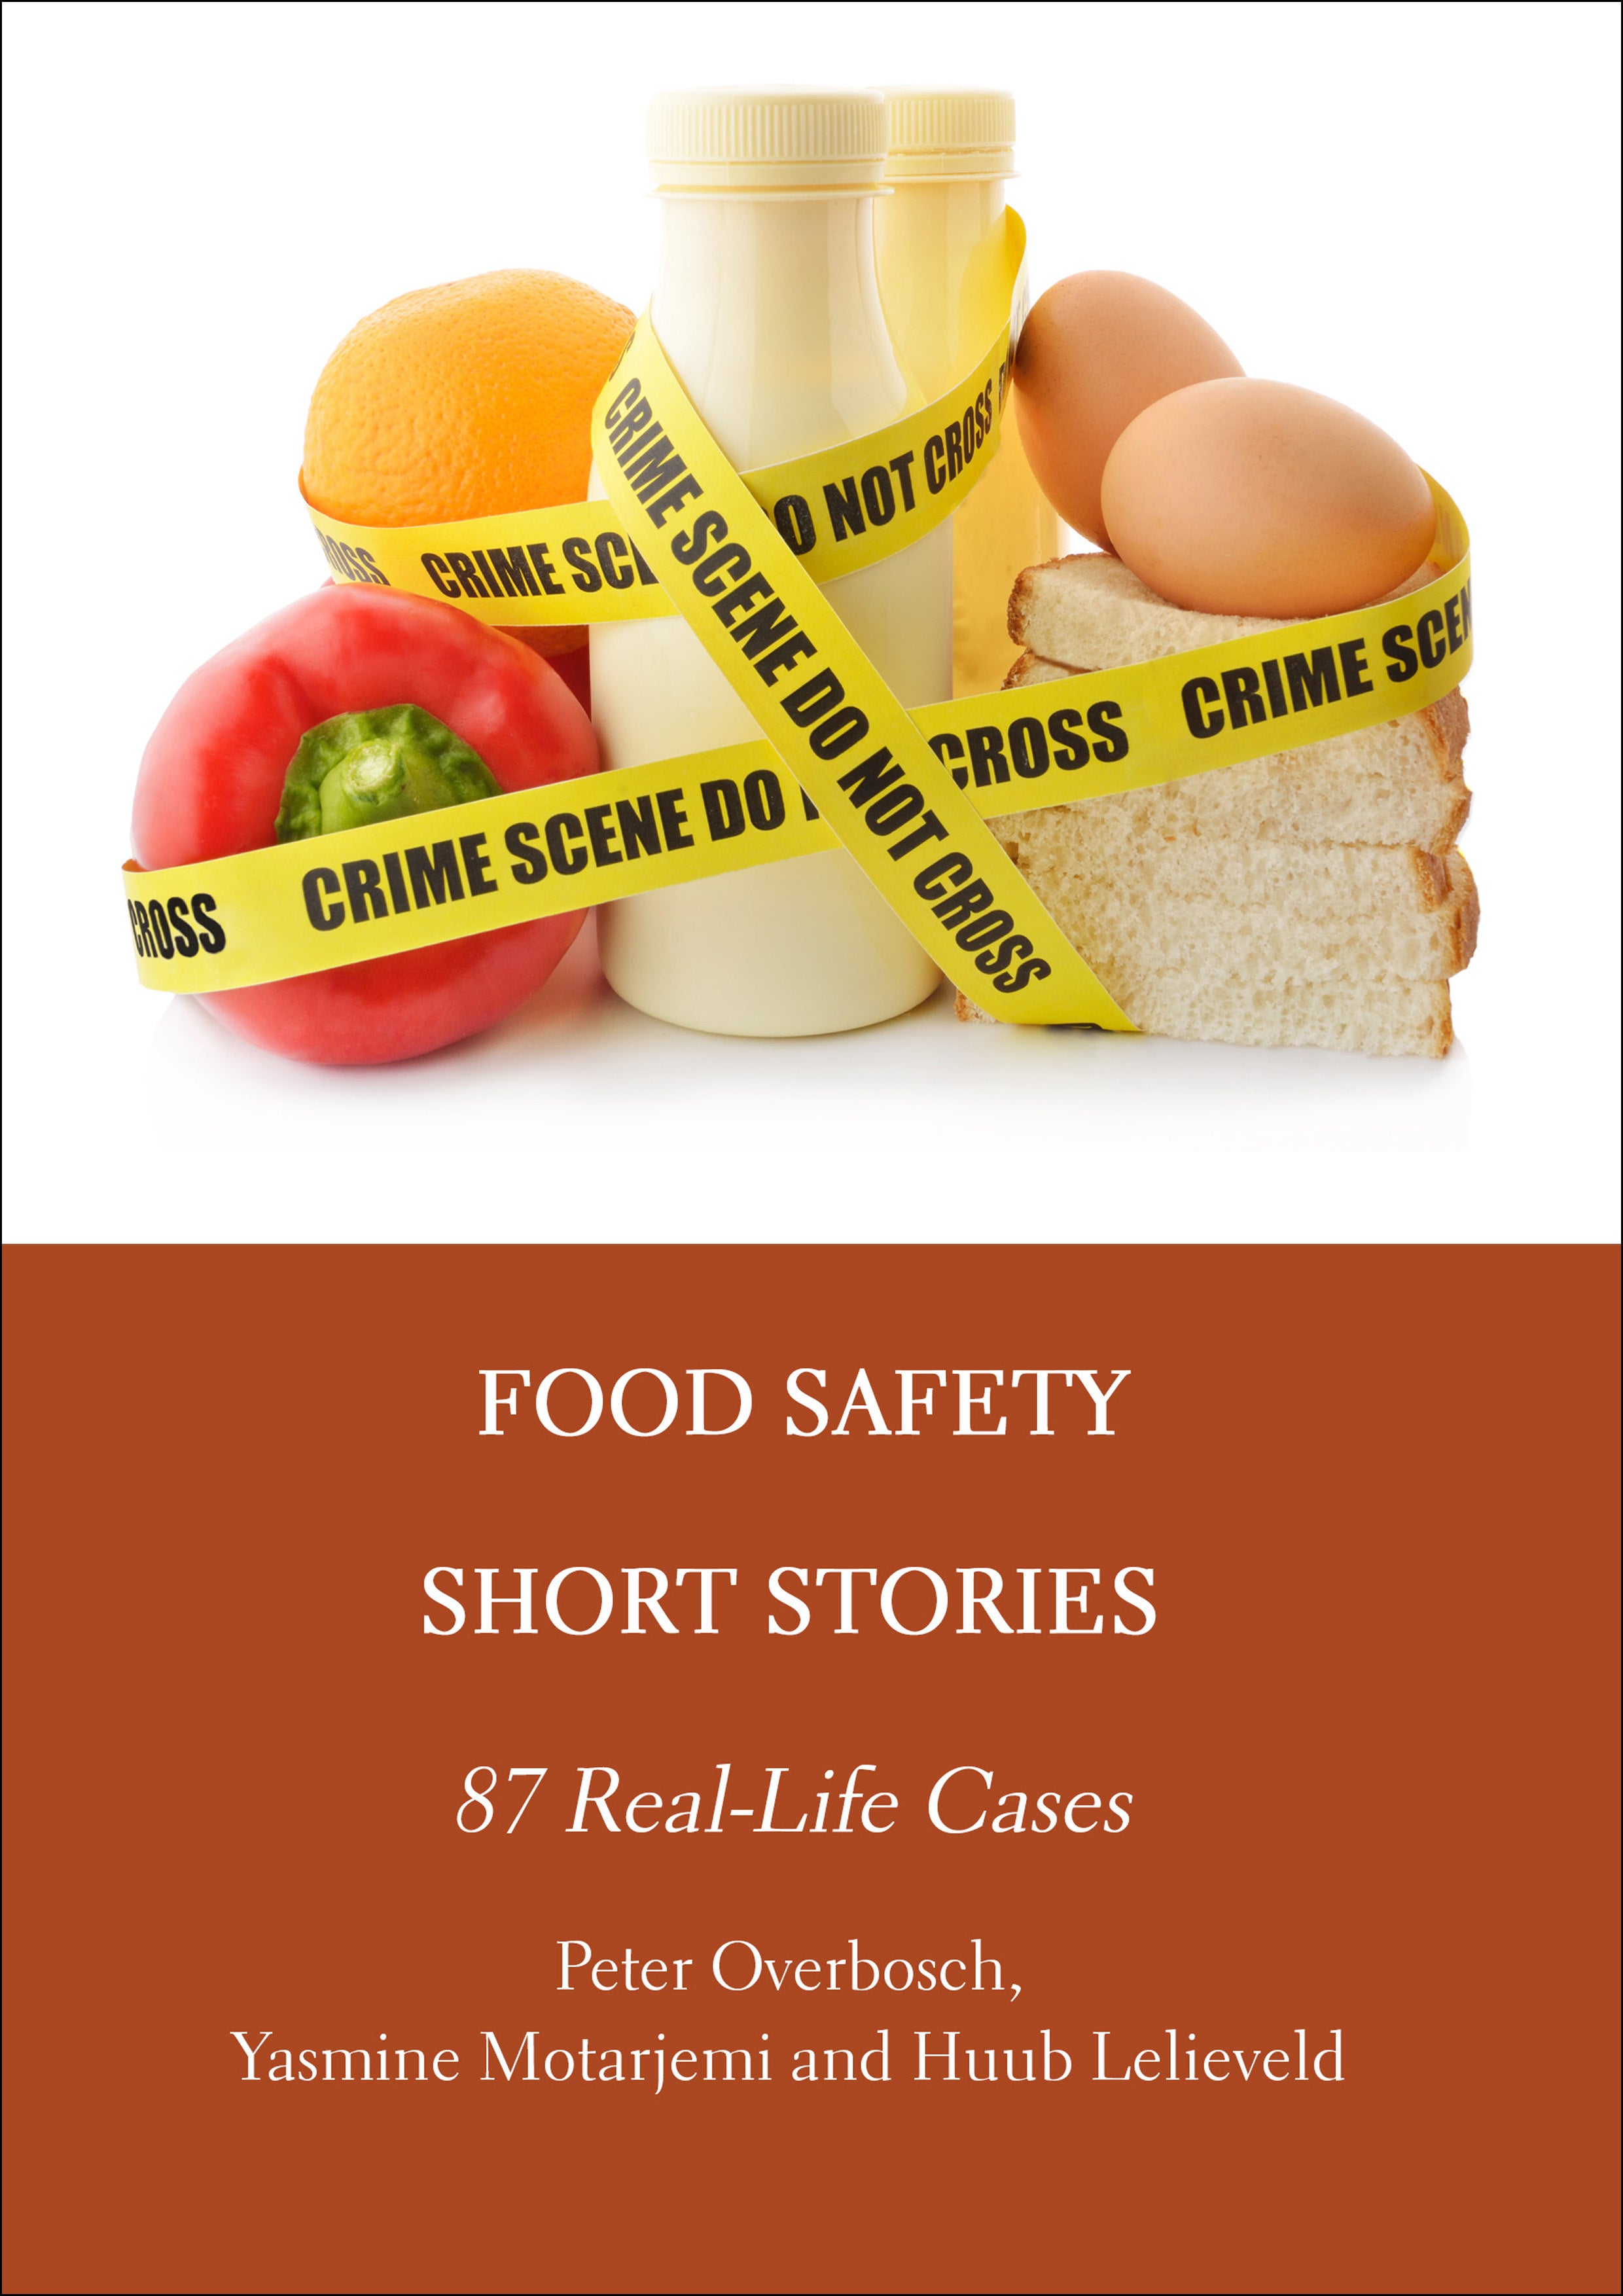 Food Safety Short Stories: 87 Real-Life Cases – Ethics Press